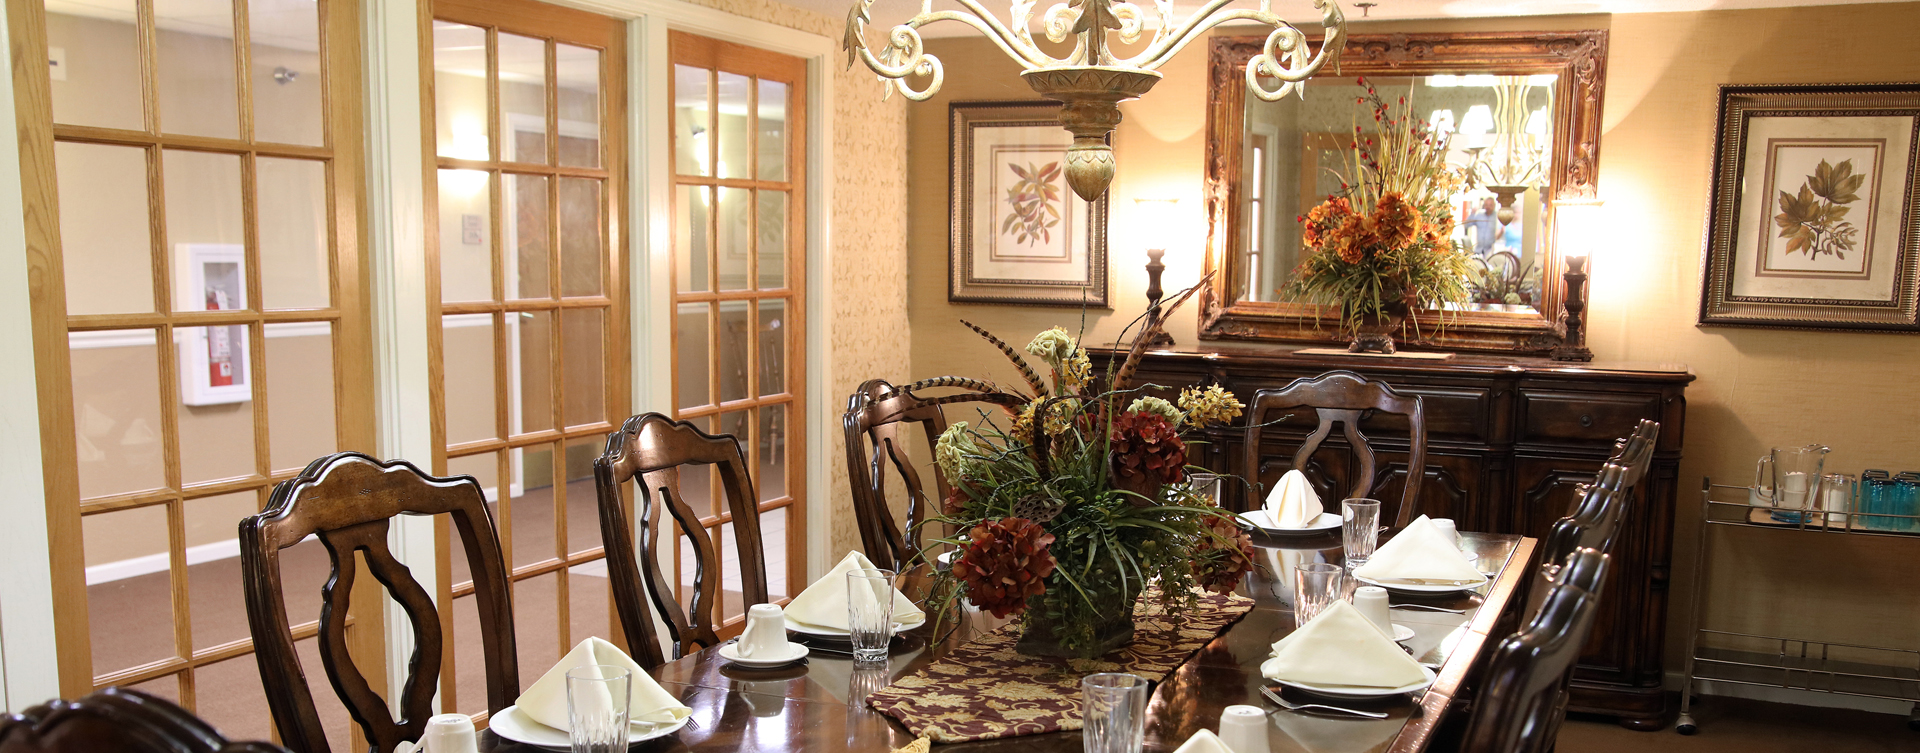 Food is best when shared with family and friends in the private dining room at Bickford of Rockford